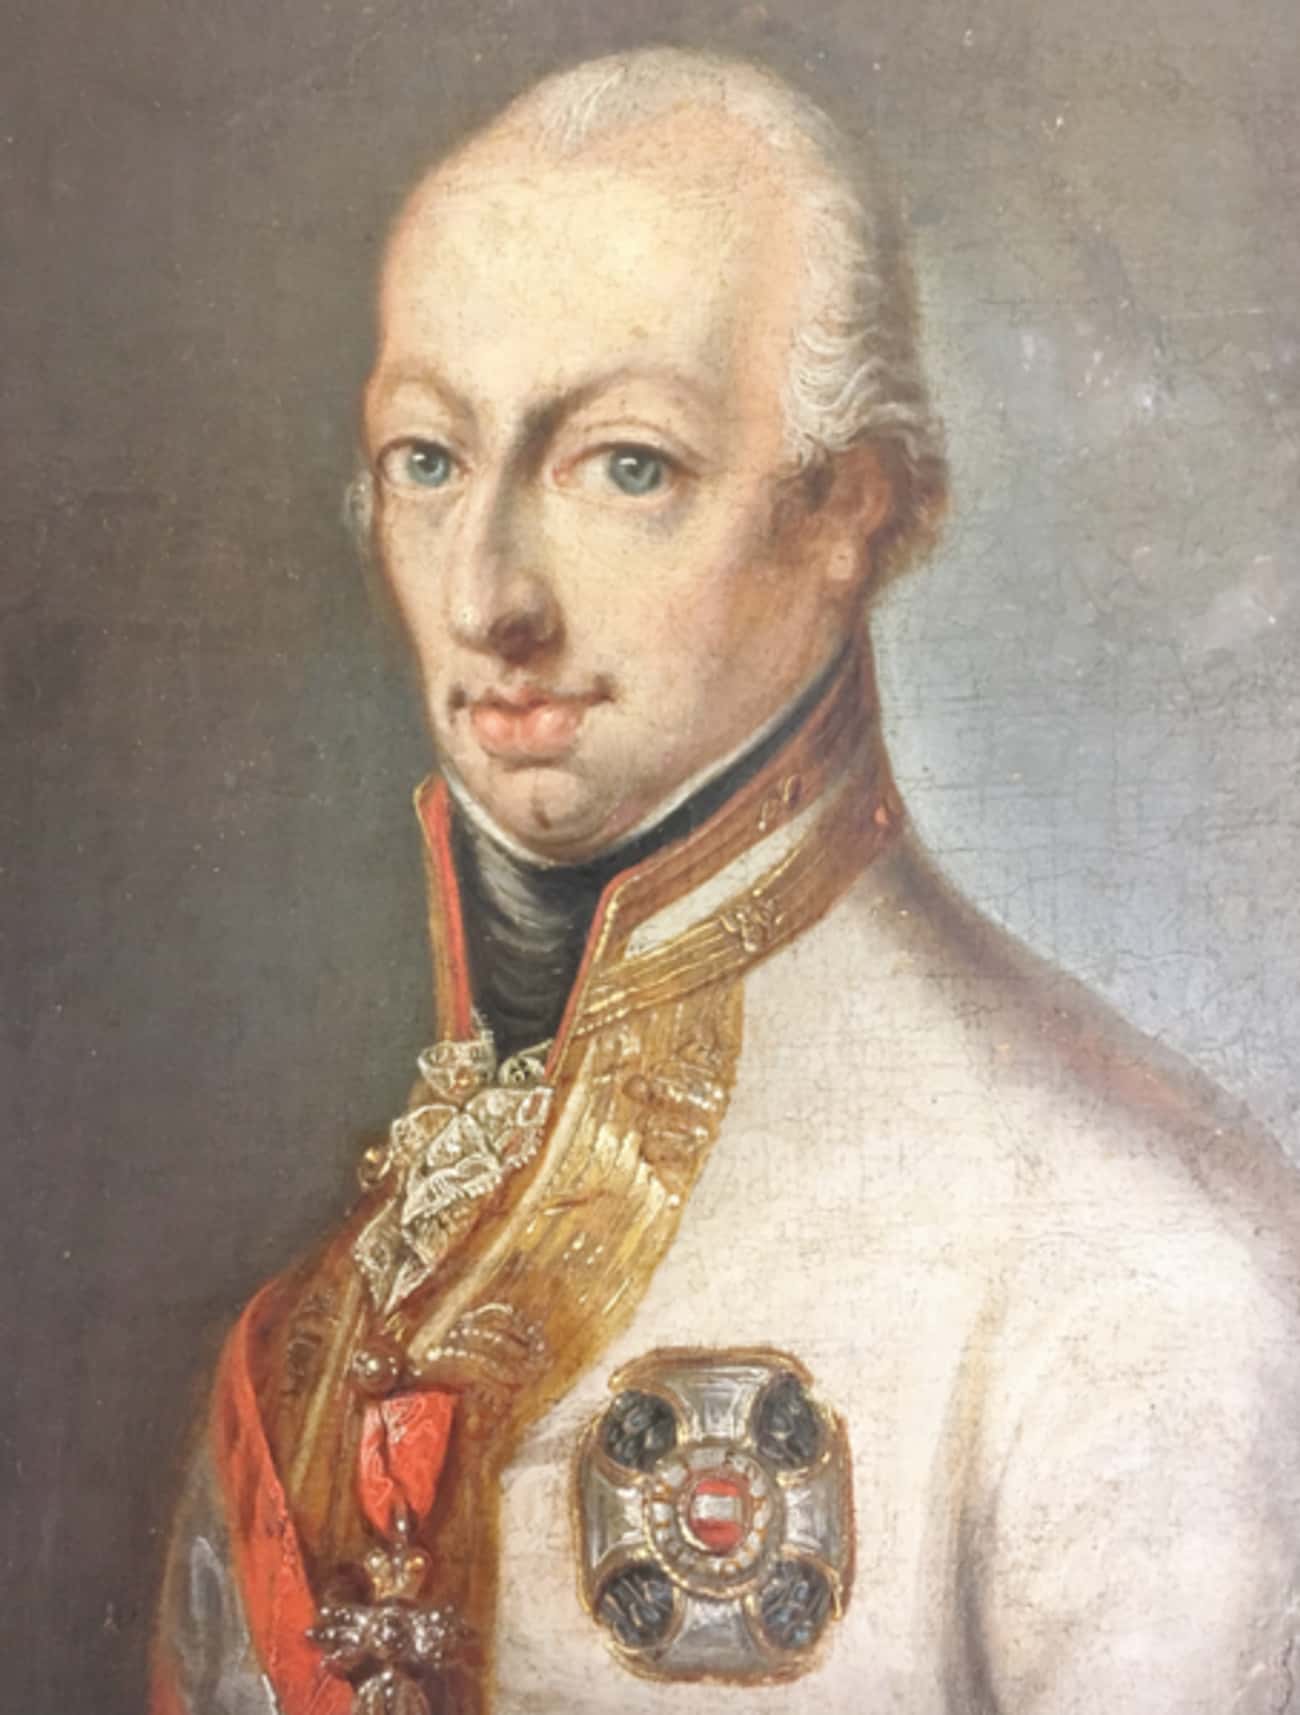 Ferdinand I Of Austria Had A Host Of Mental And Physical Problems, Yet Reigned For 13 Years